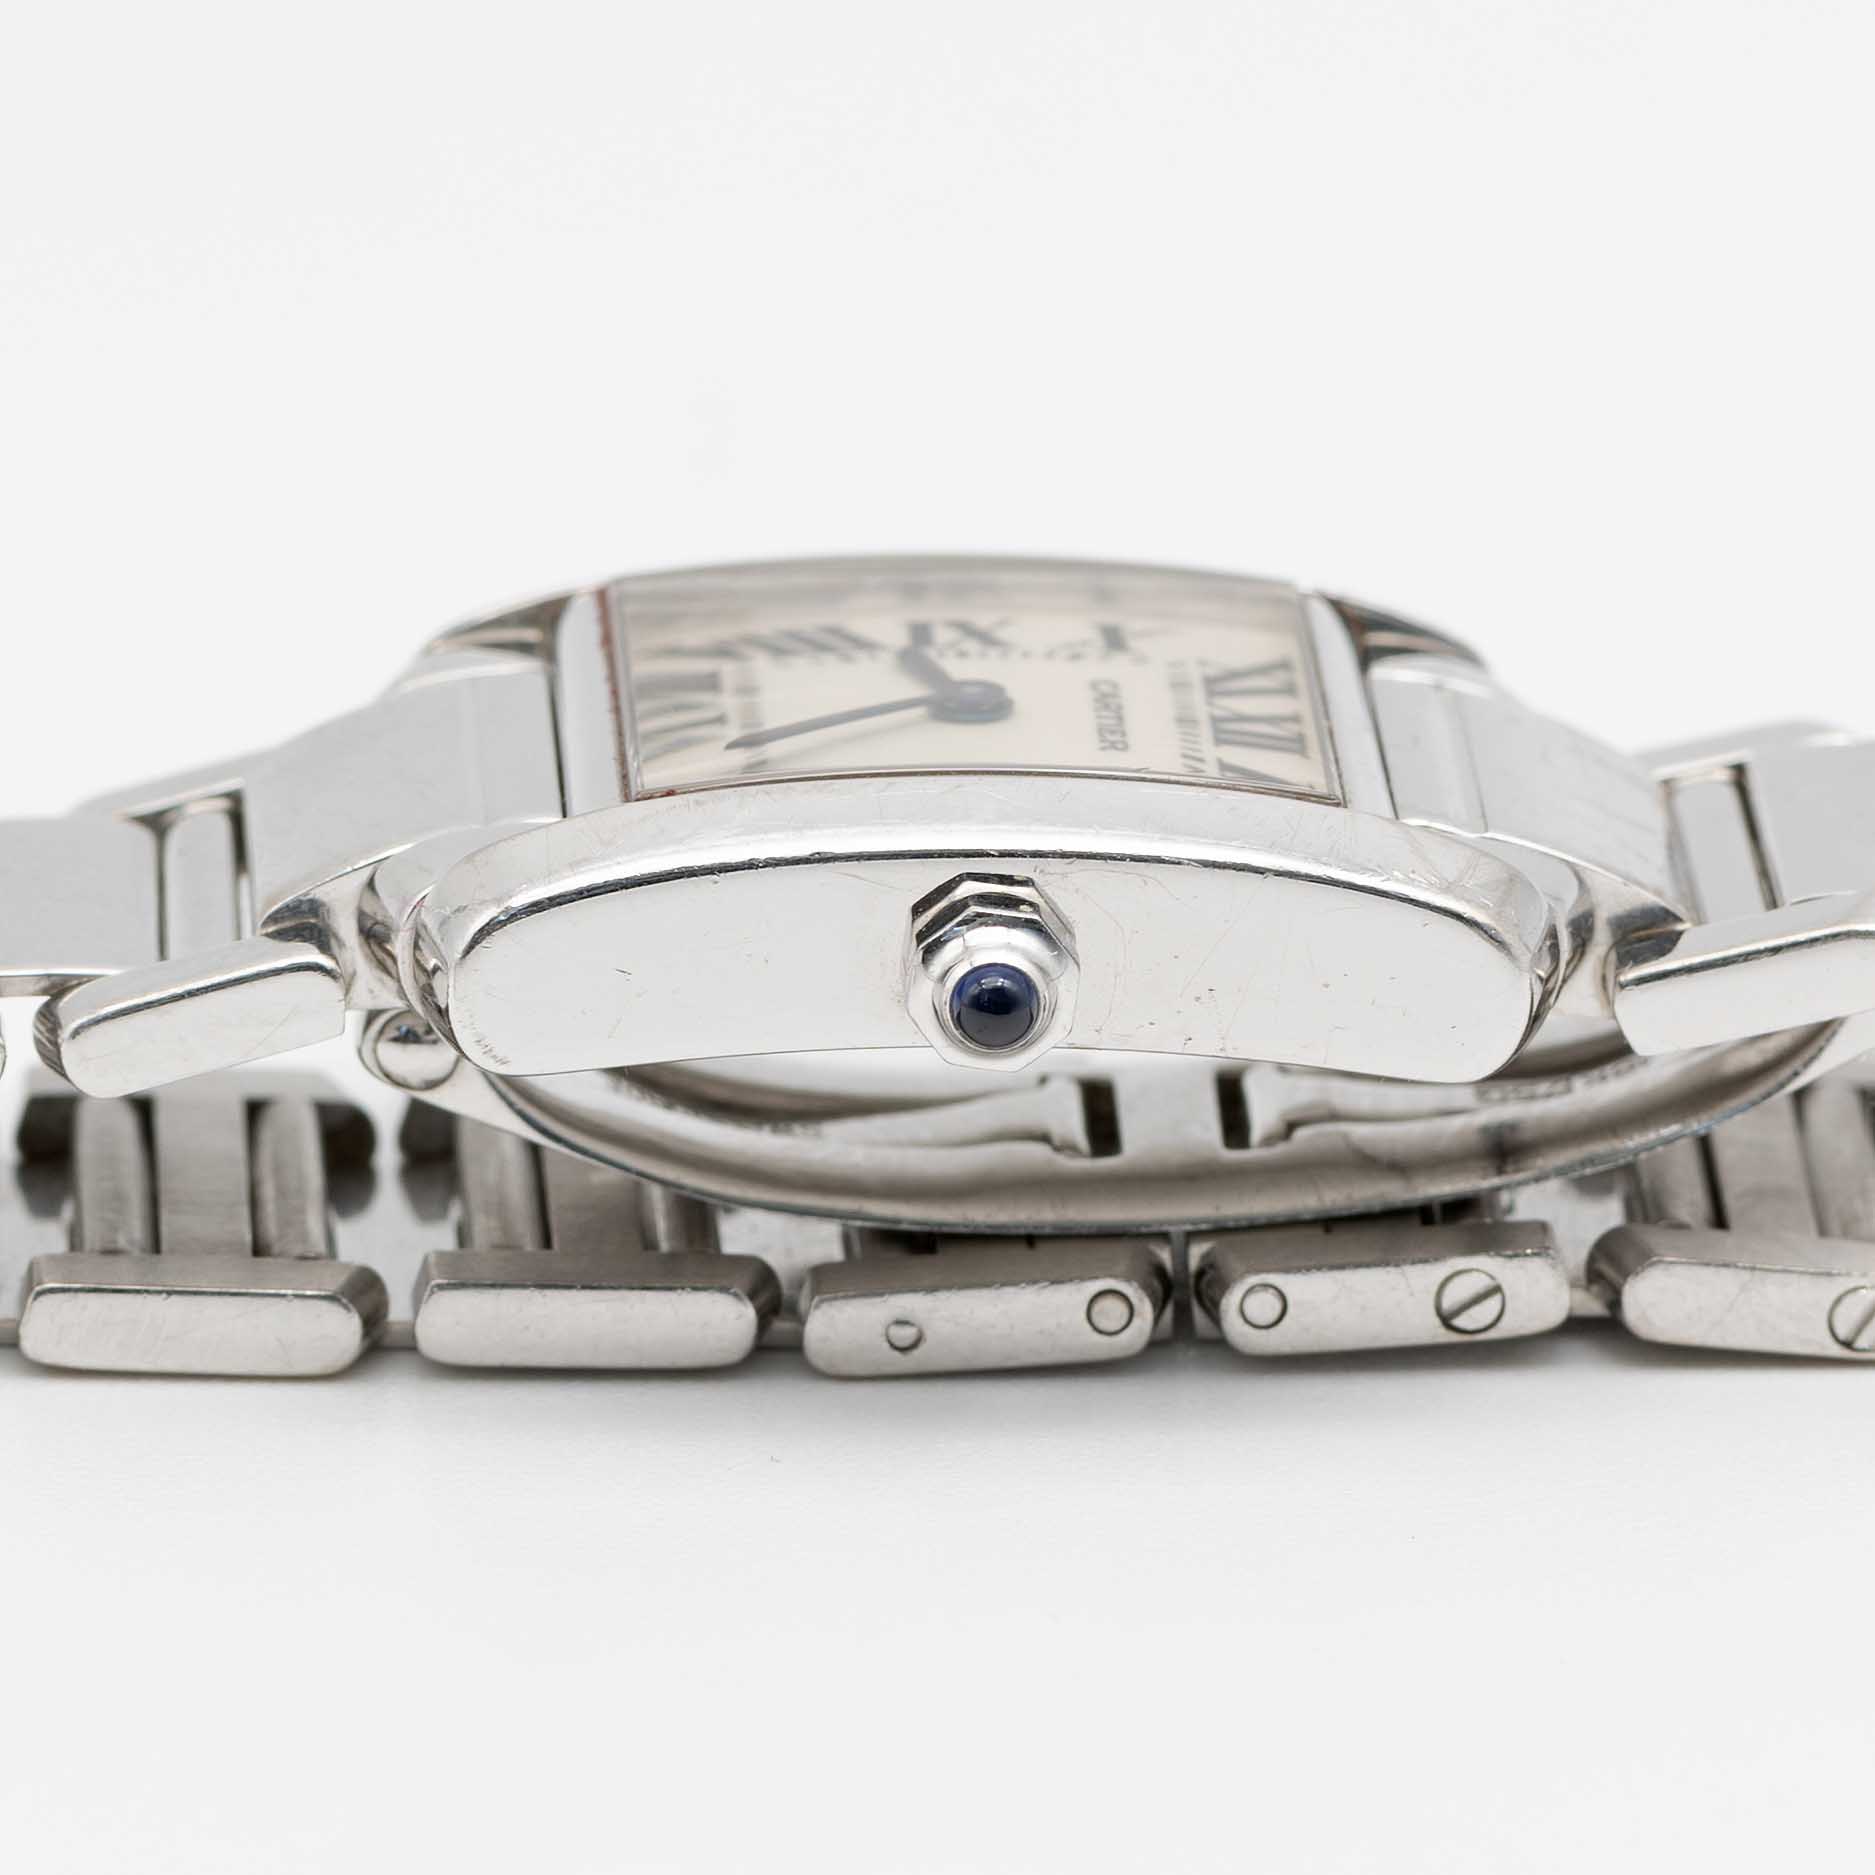 A LADIES 18K SOLID WHITE GOLD CARTIER TANK FRANCAISE BRACELET WATCH CIRCA 2005, REF. 2403 - Image 8 of 9